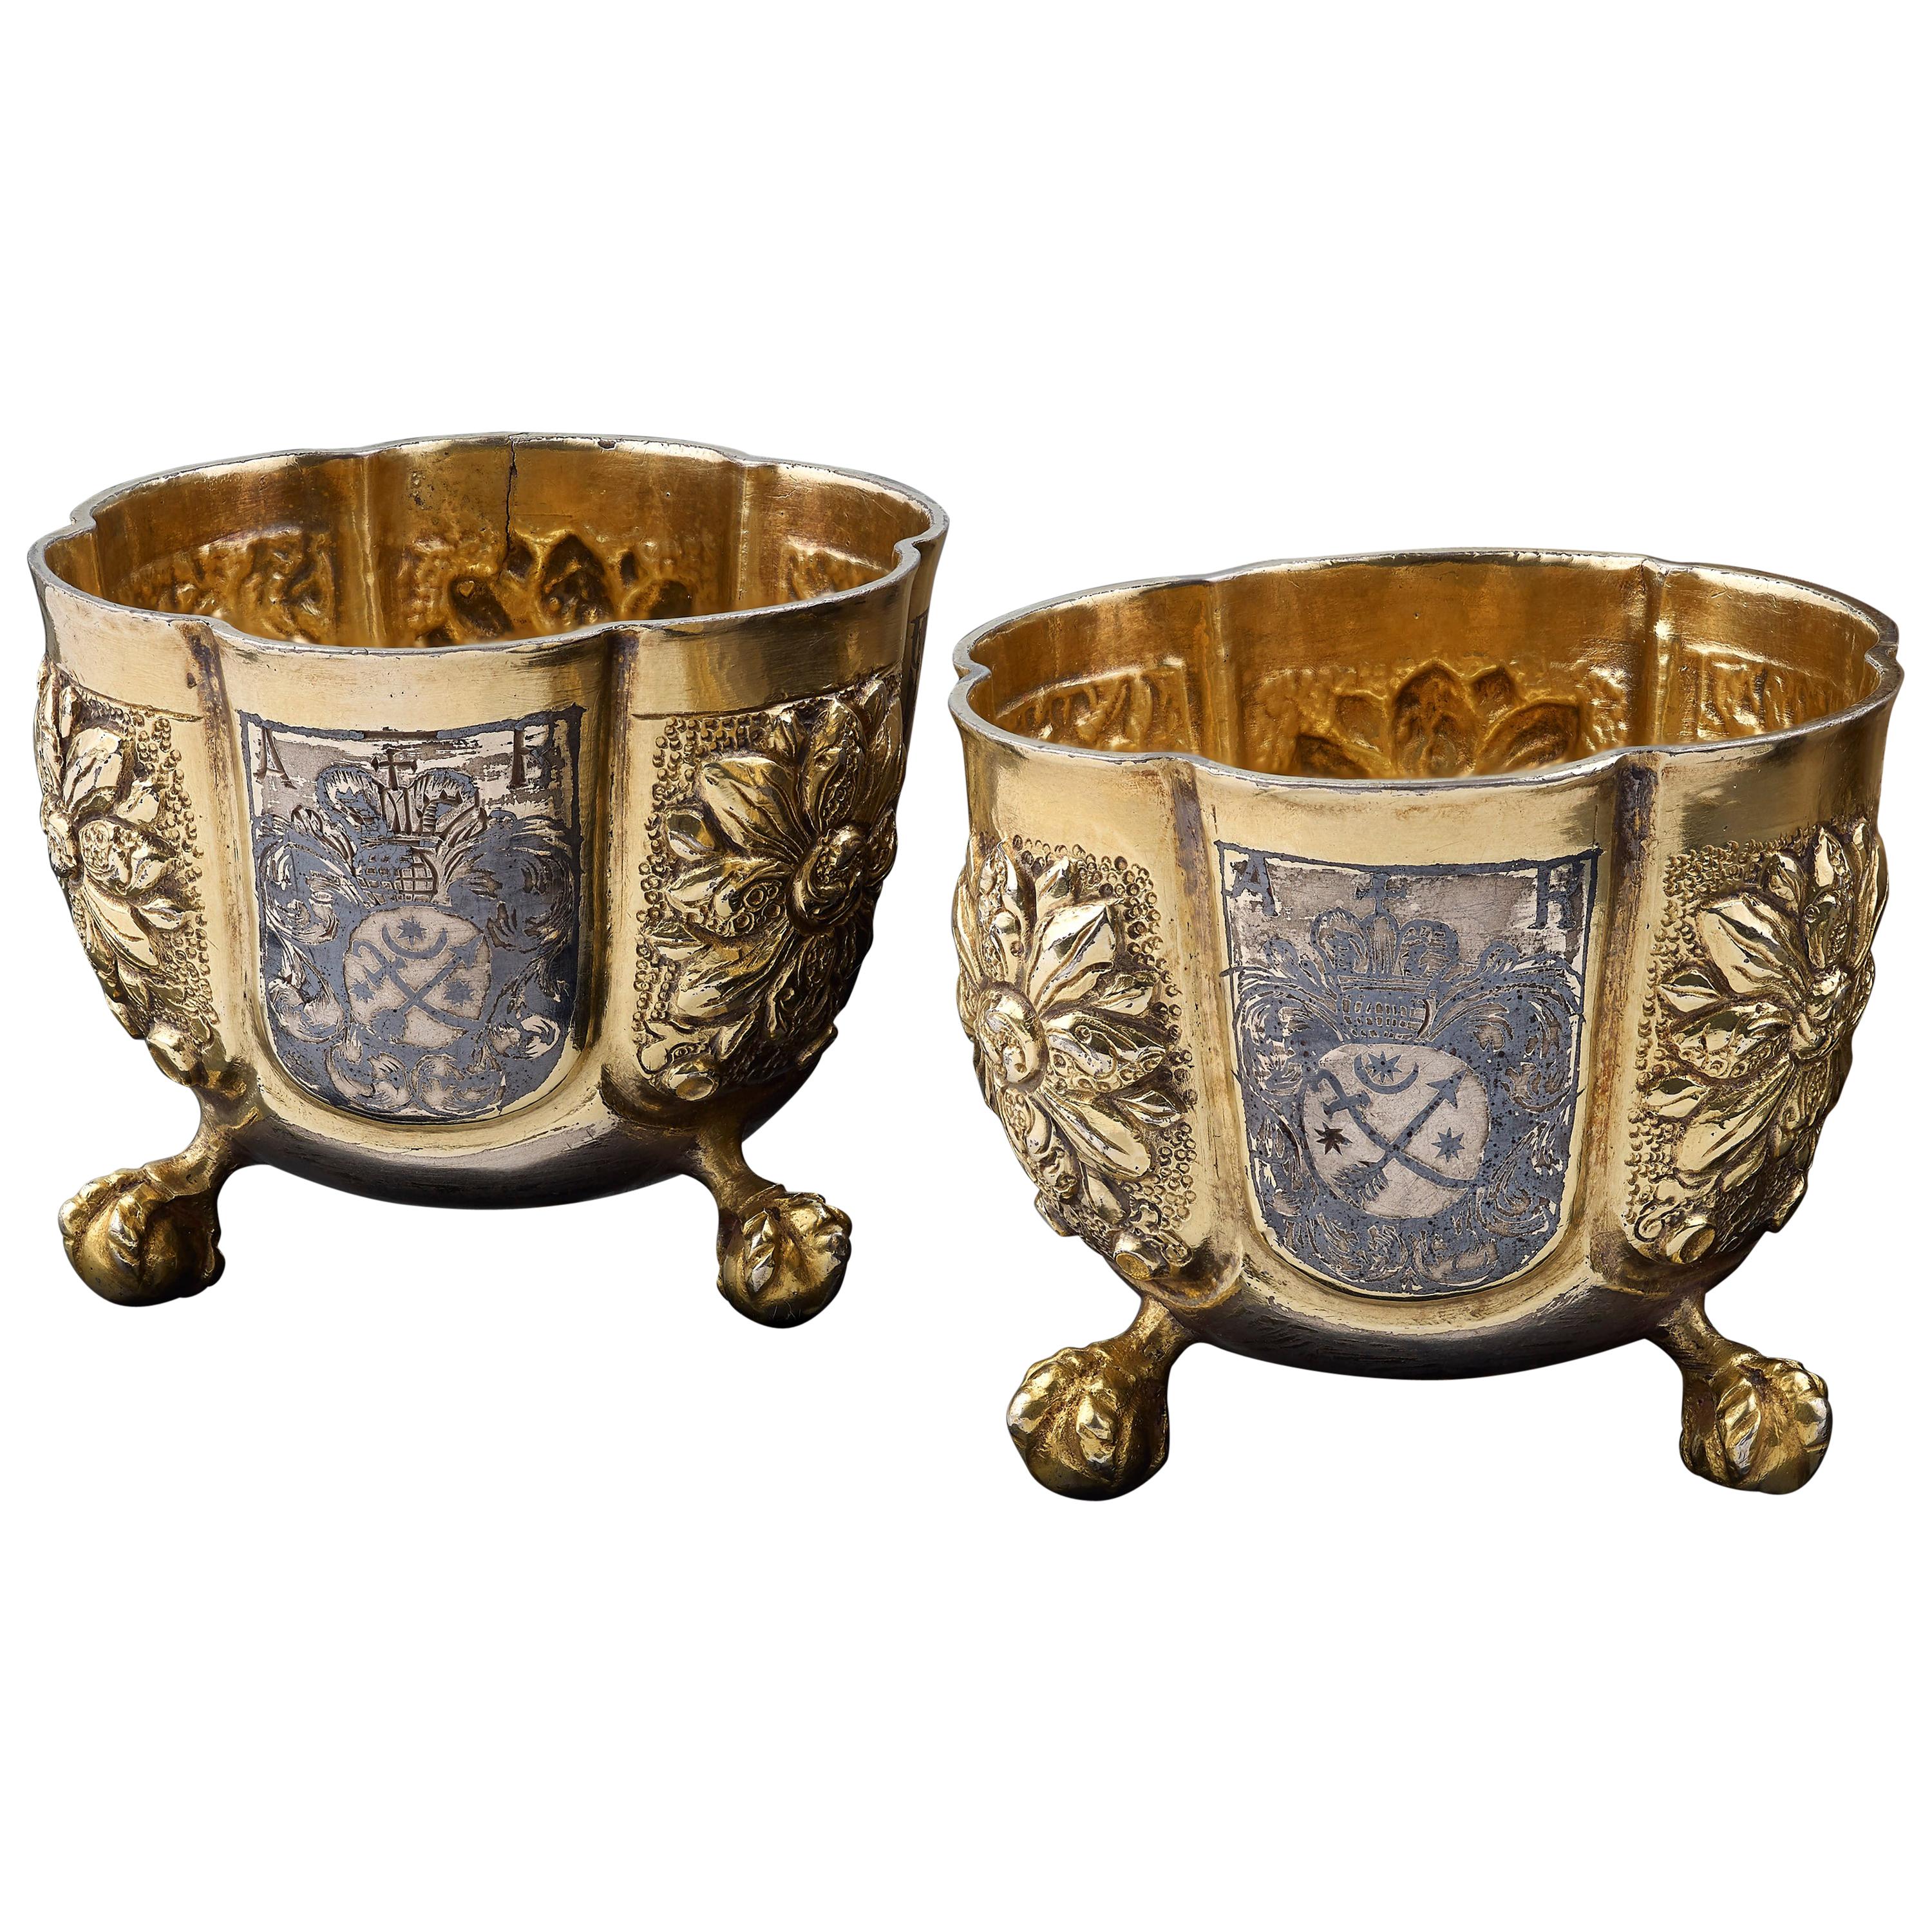 Pair of 17th Century Russian Silver Vodka Cups